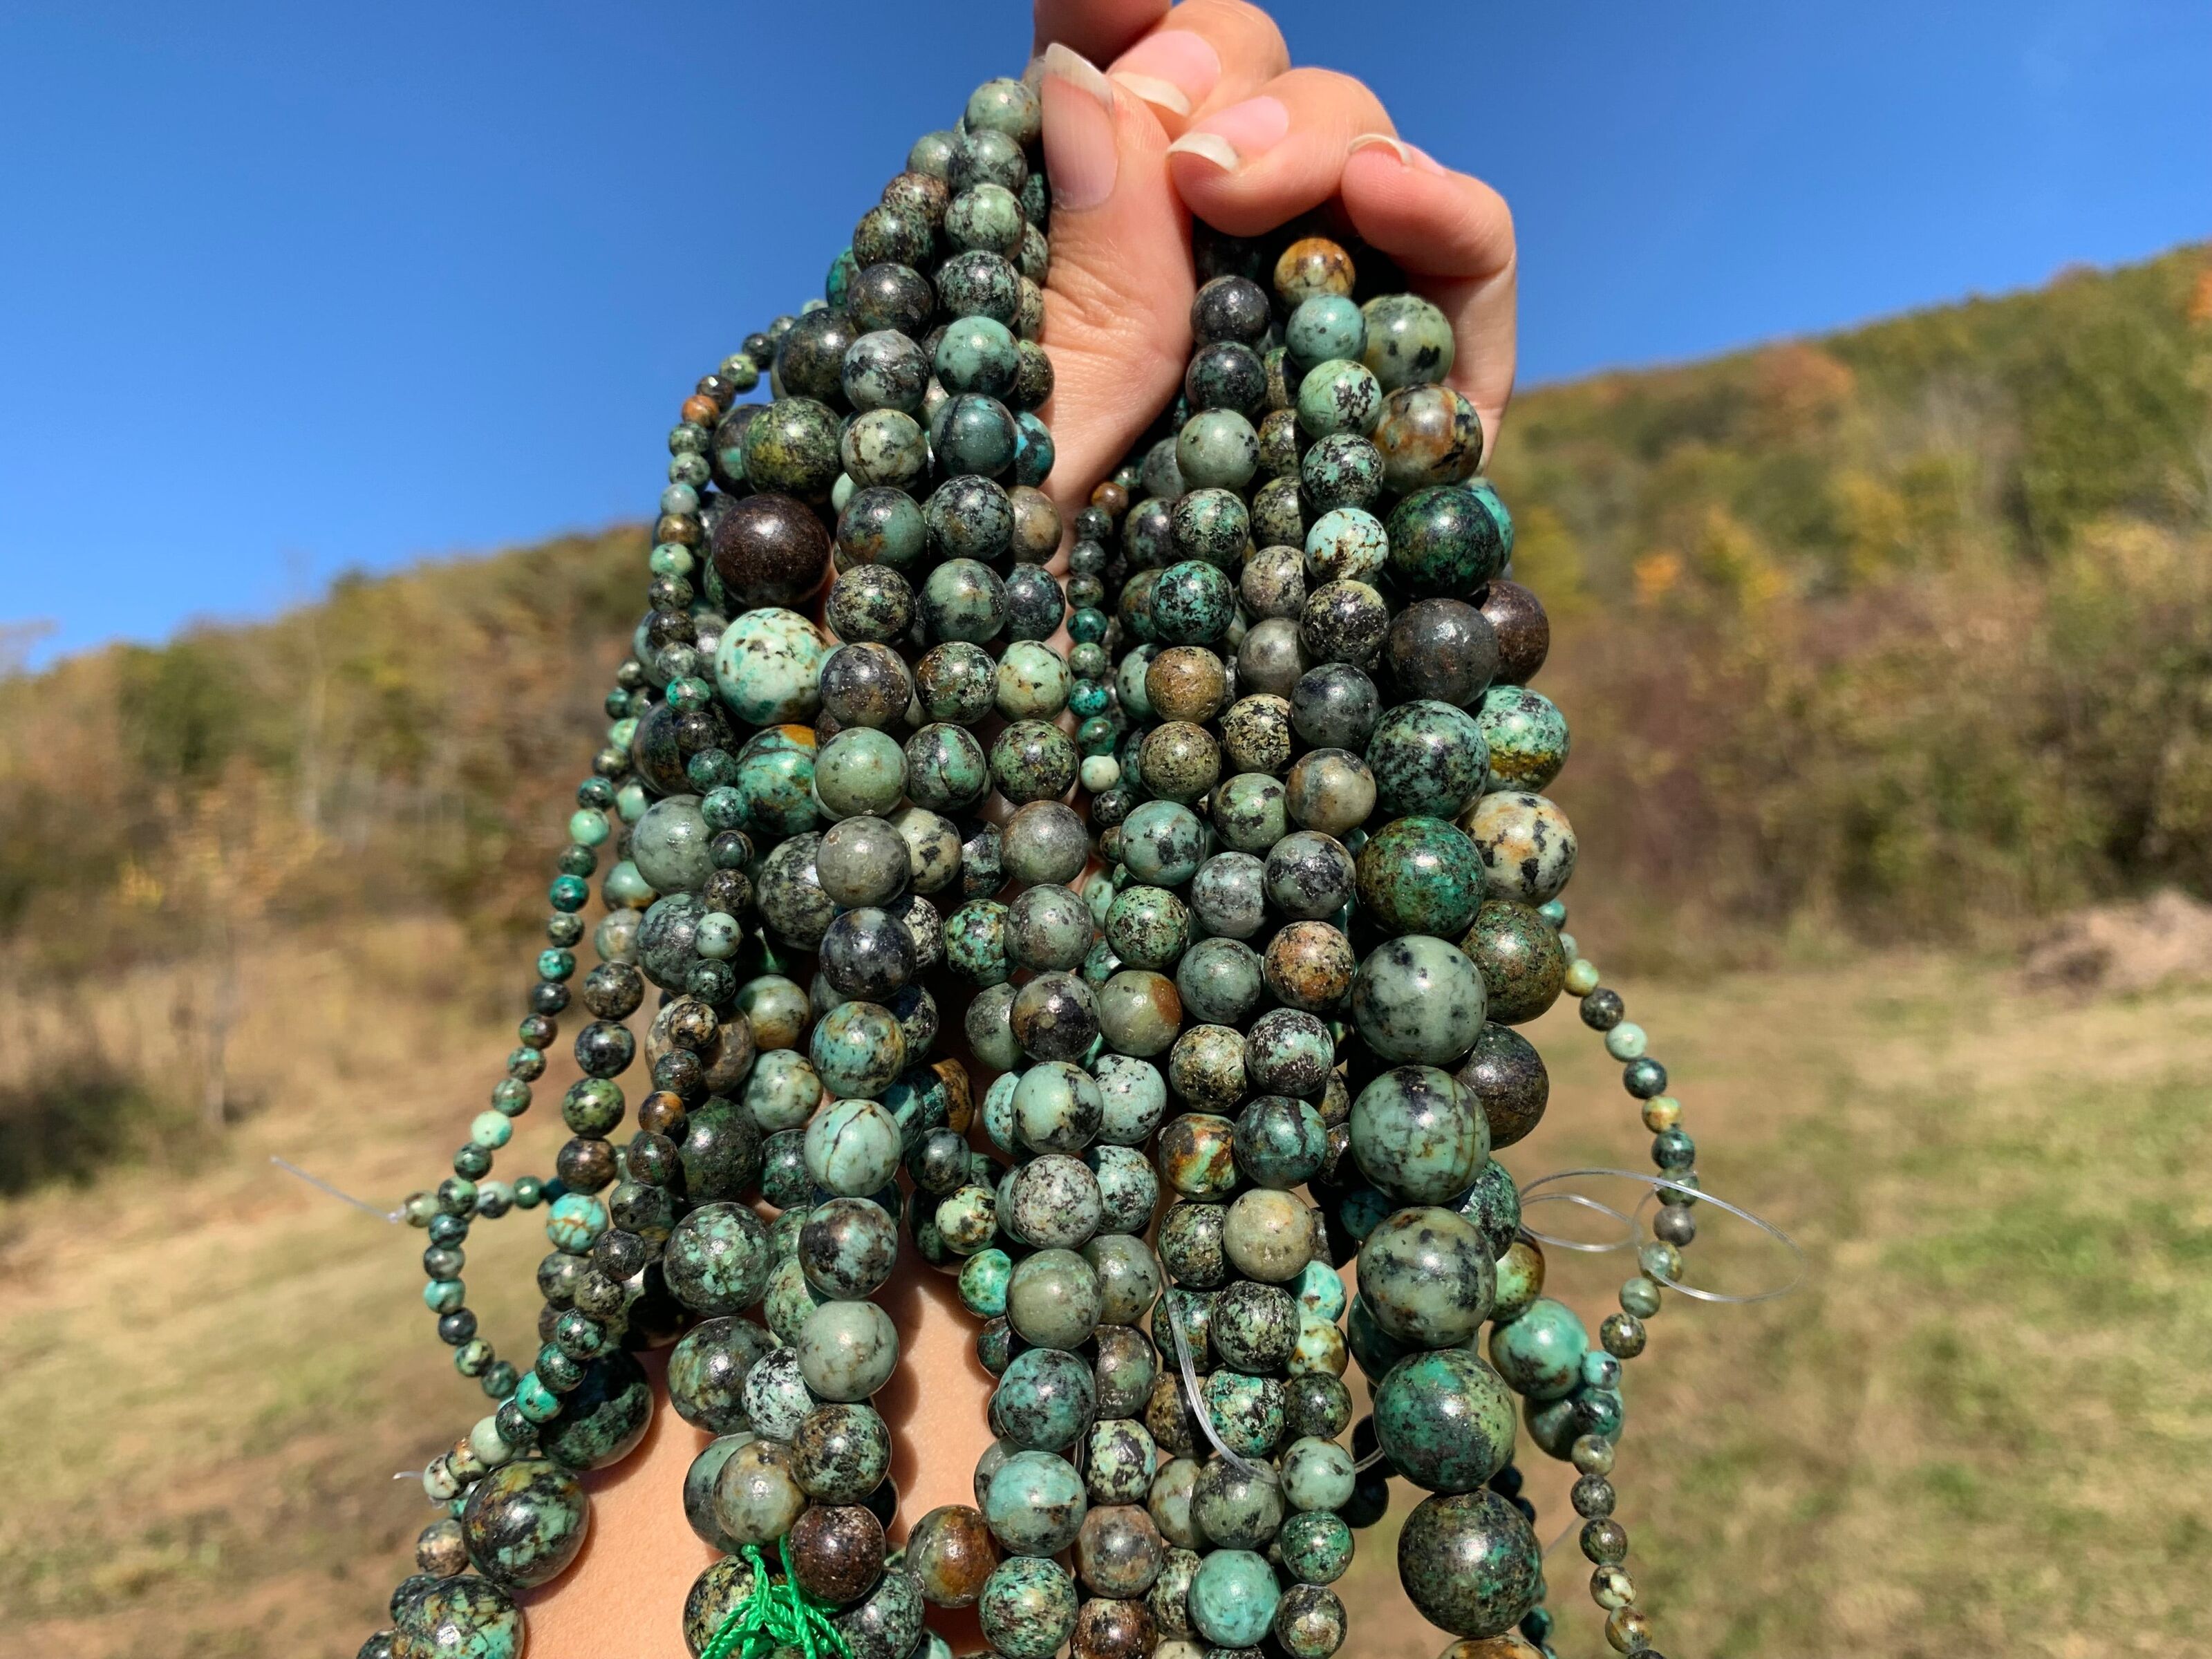 2mm 3mm 4mm 6mm 8mm 10mm 12mm Natural African Turquoise Beads for Jewelry Making by Ruilong (12mm)